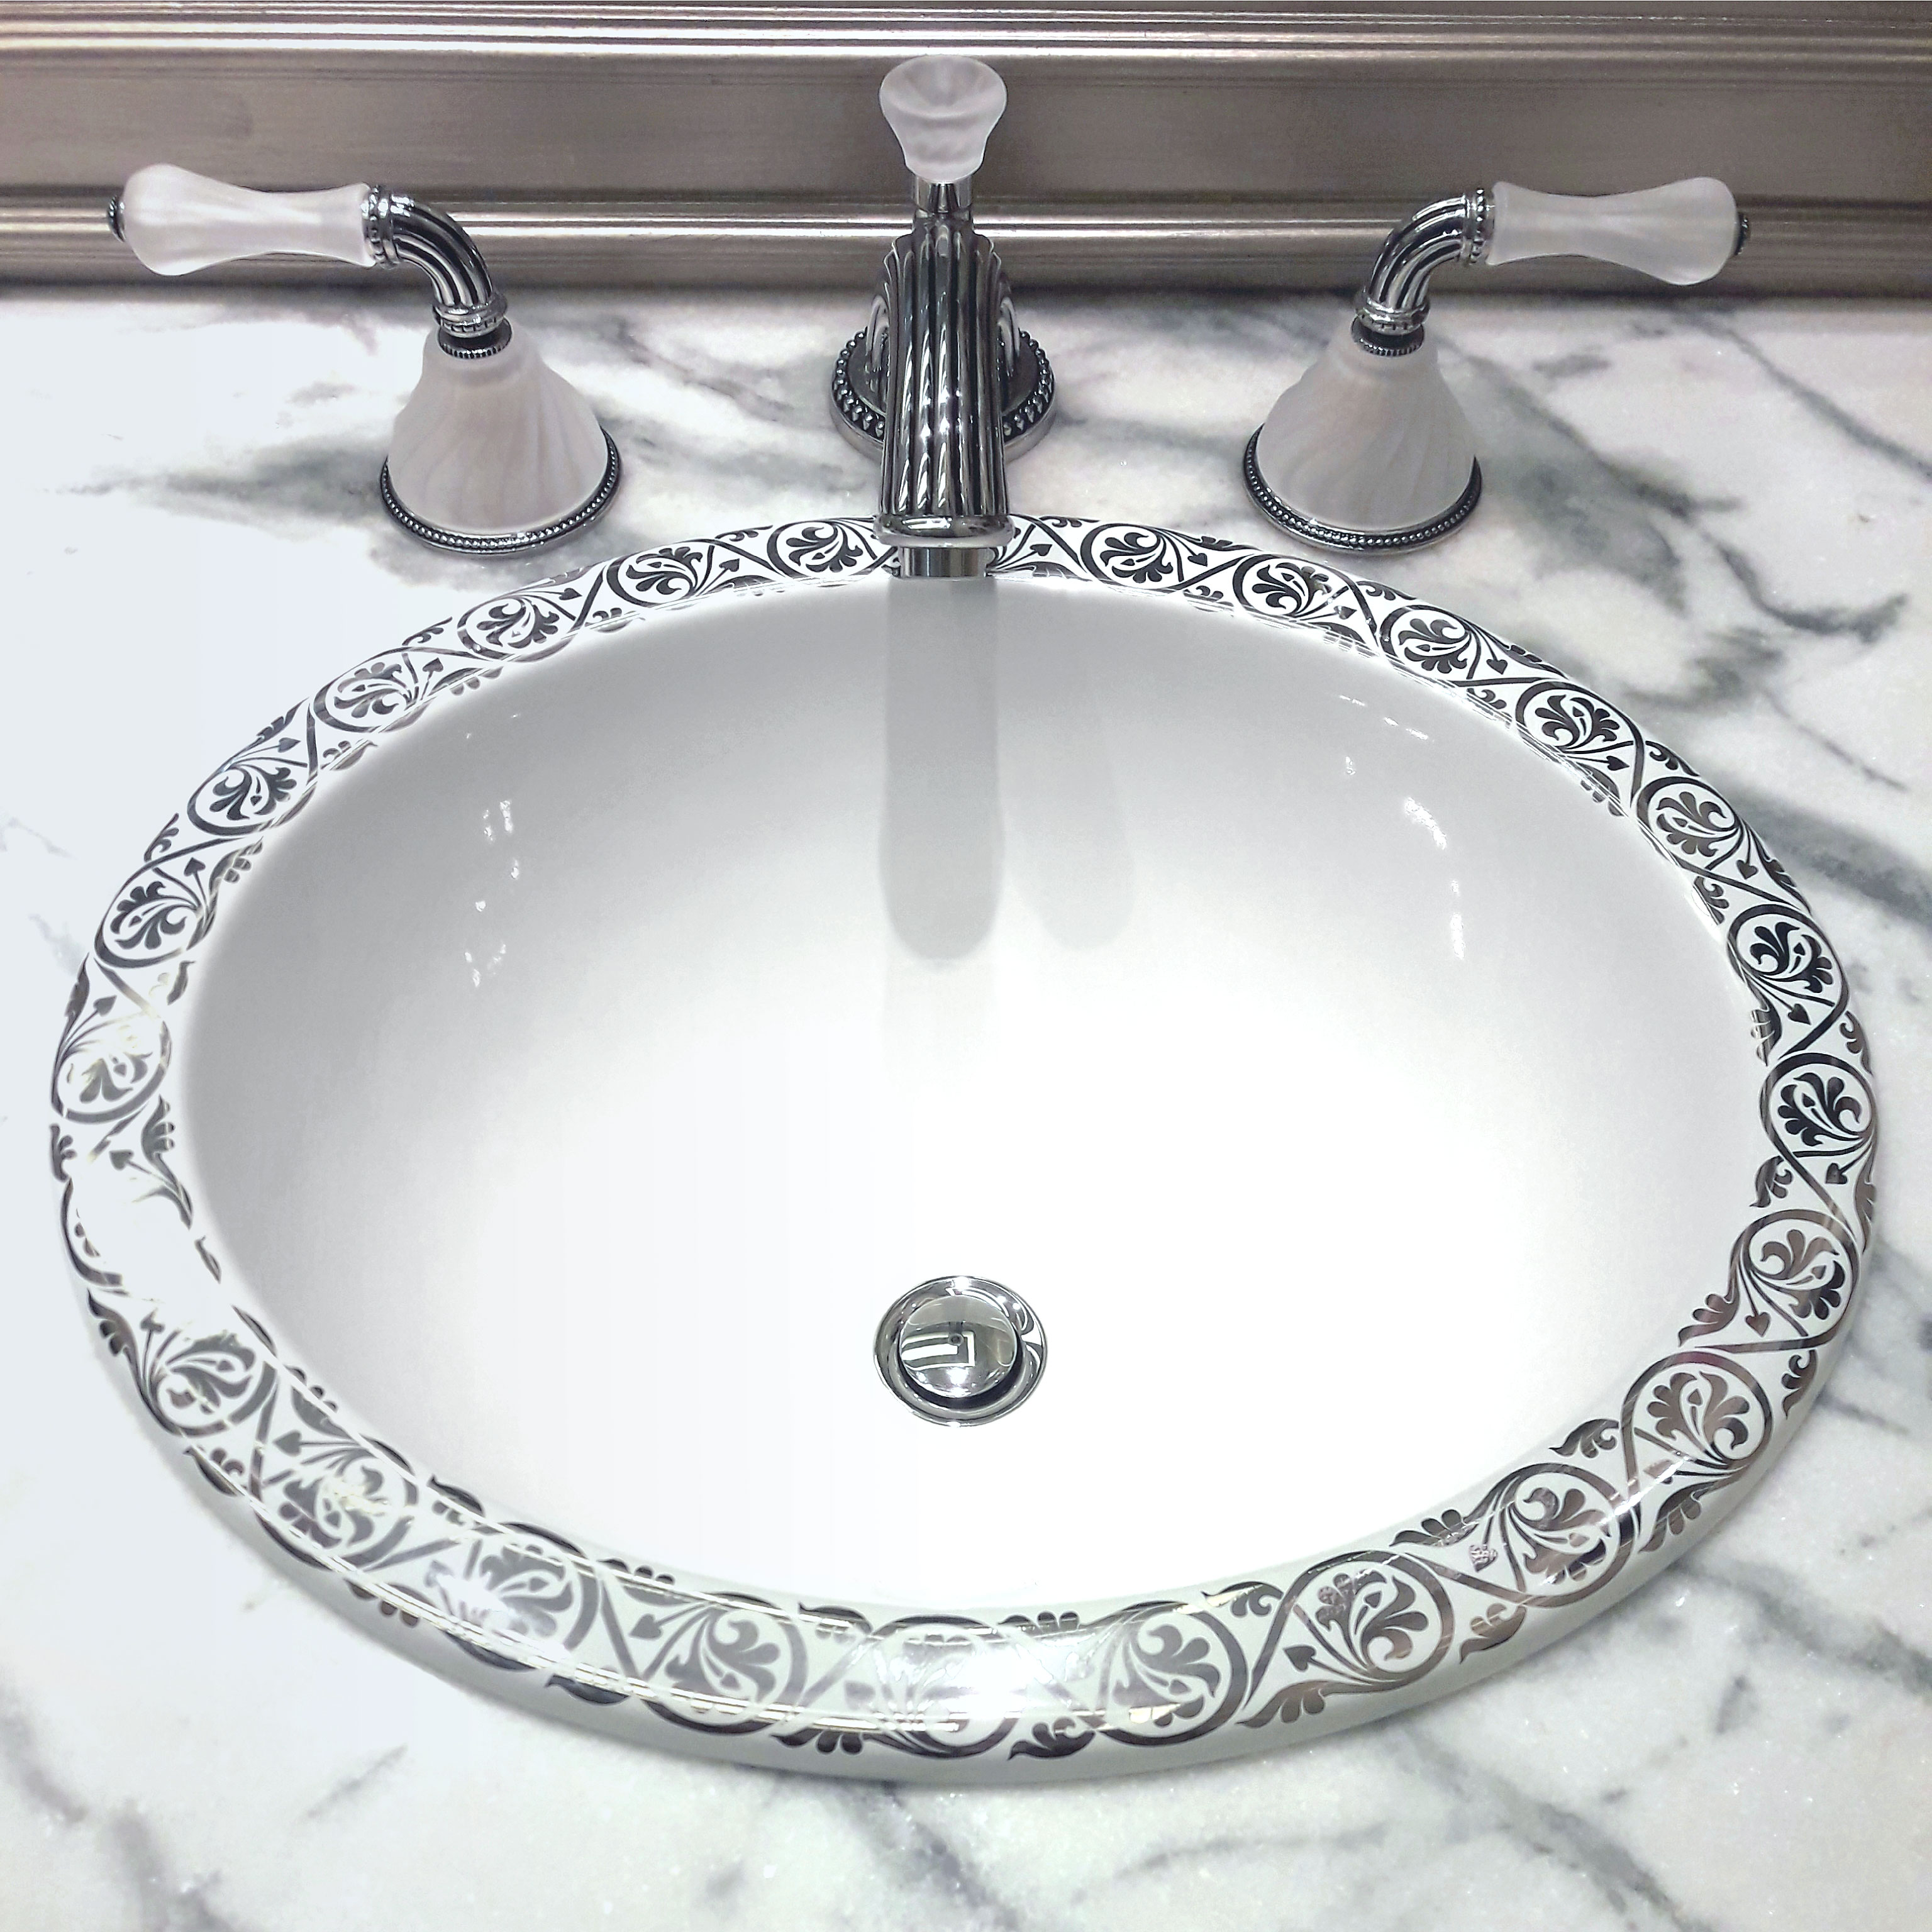 Platinum isn’t just for hair, it’s great in bathrooms & on sinks too!